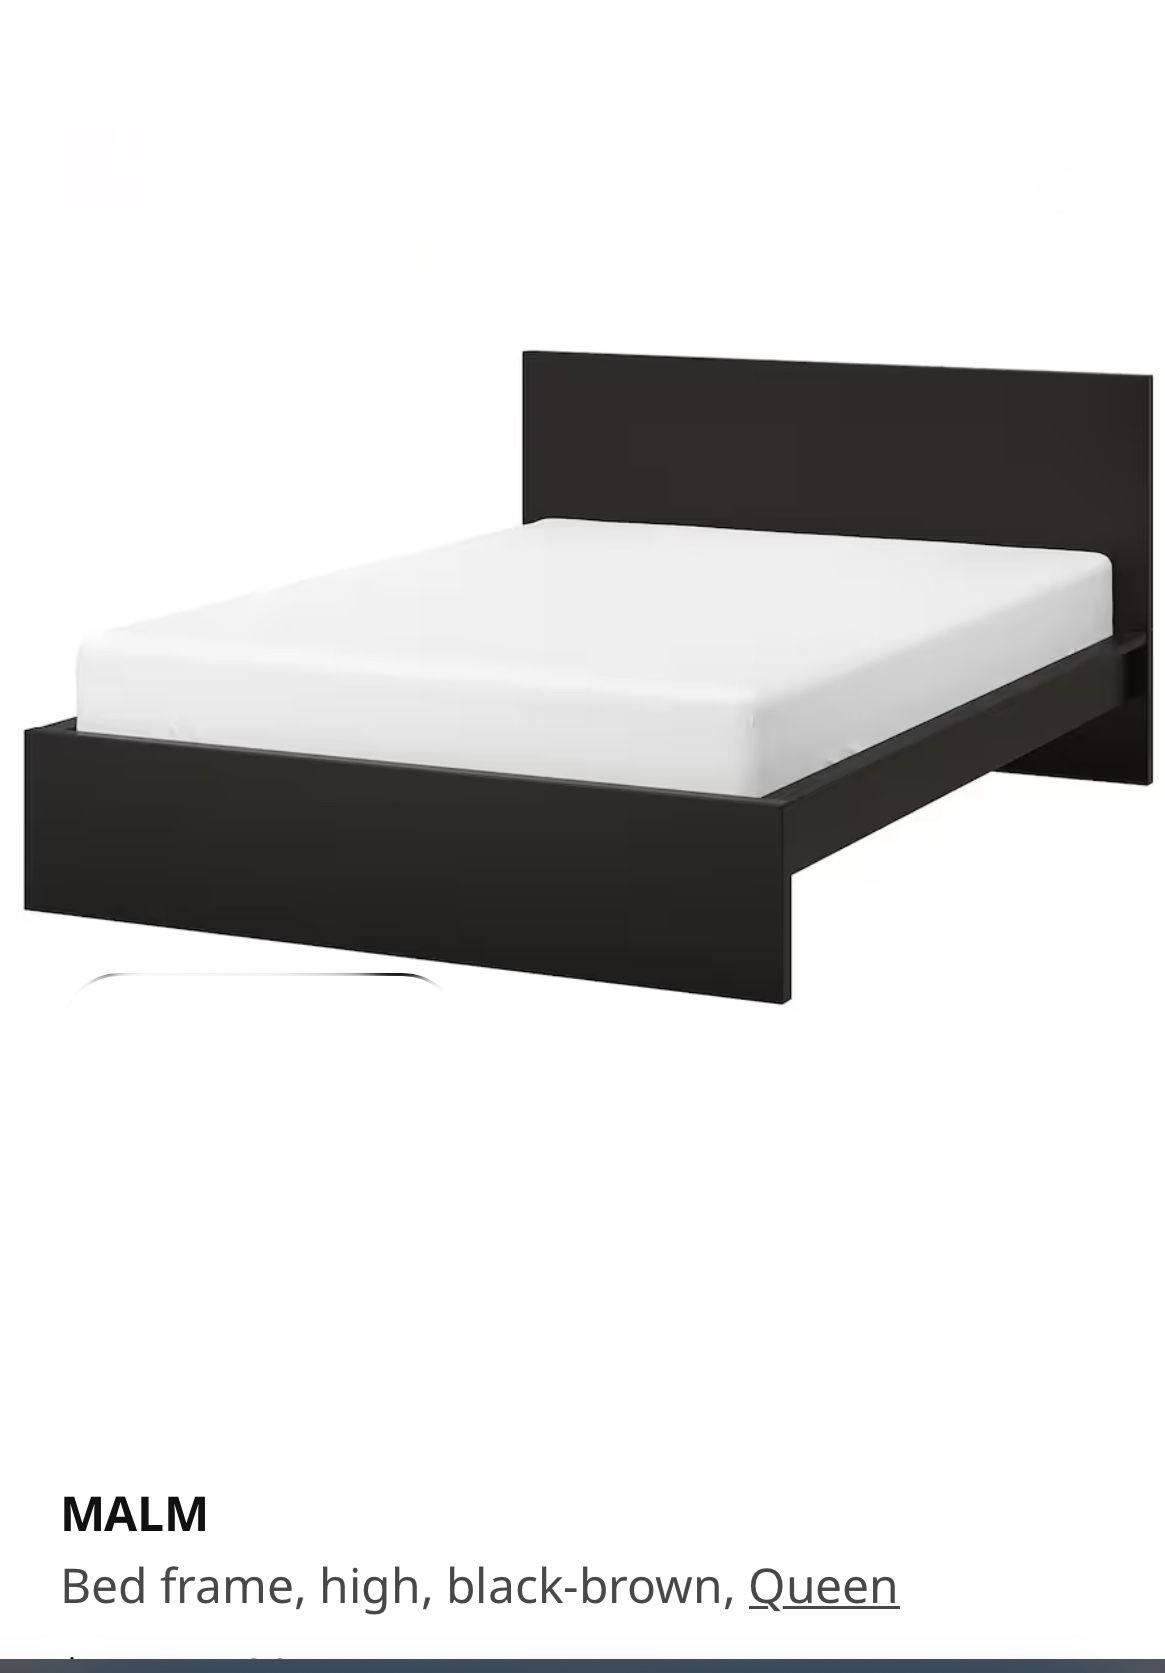 Queen Sized Ikea Malm Bed Frame 